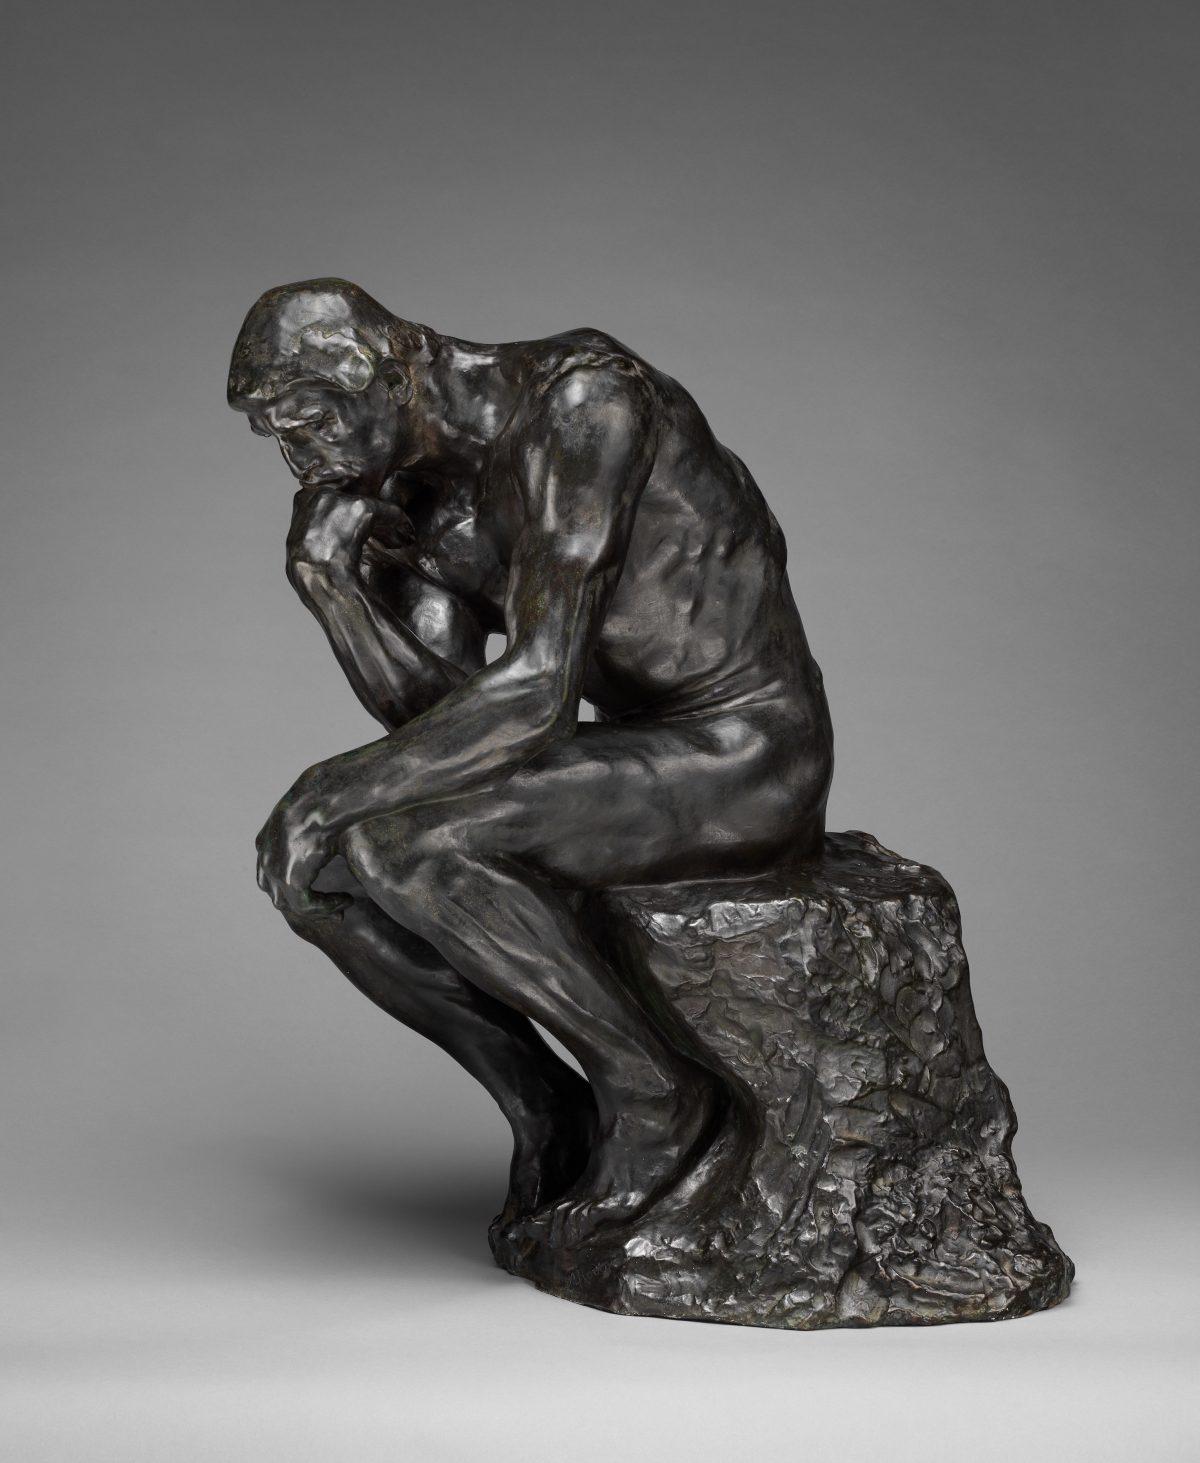 “The Thinker” by Auguste Rodin (1840–1917). Founder: cast by Alexis Rudier (French), modeled circa 1880, cast circa 1910, bronze. The Metropolitan Museum of Art, gift of Thomas F. Ryan, 1910. (The Metropolitan Museum of Art)